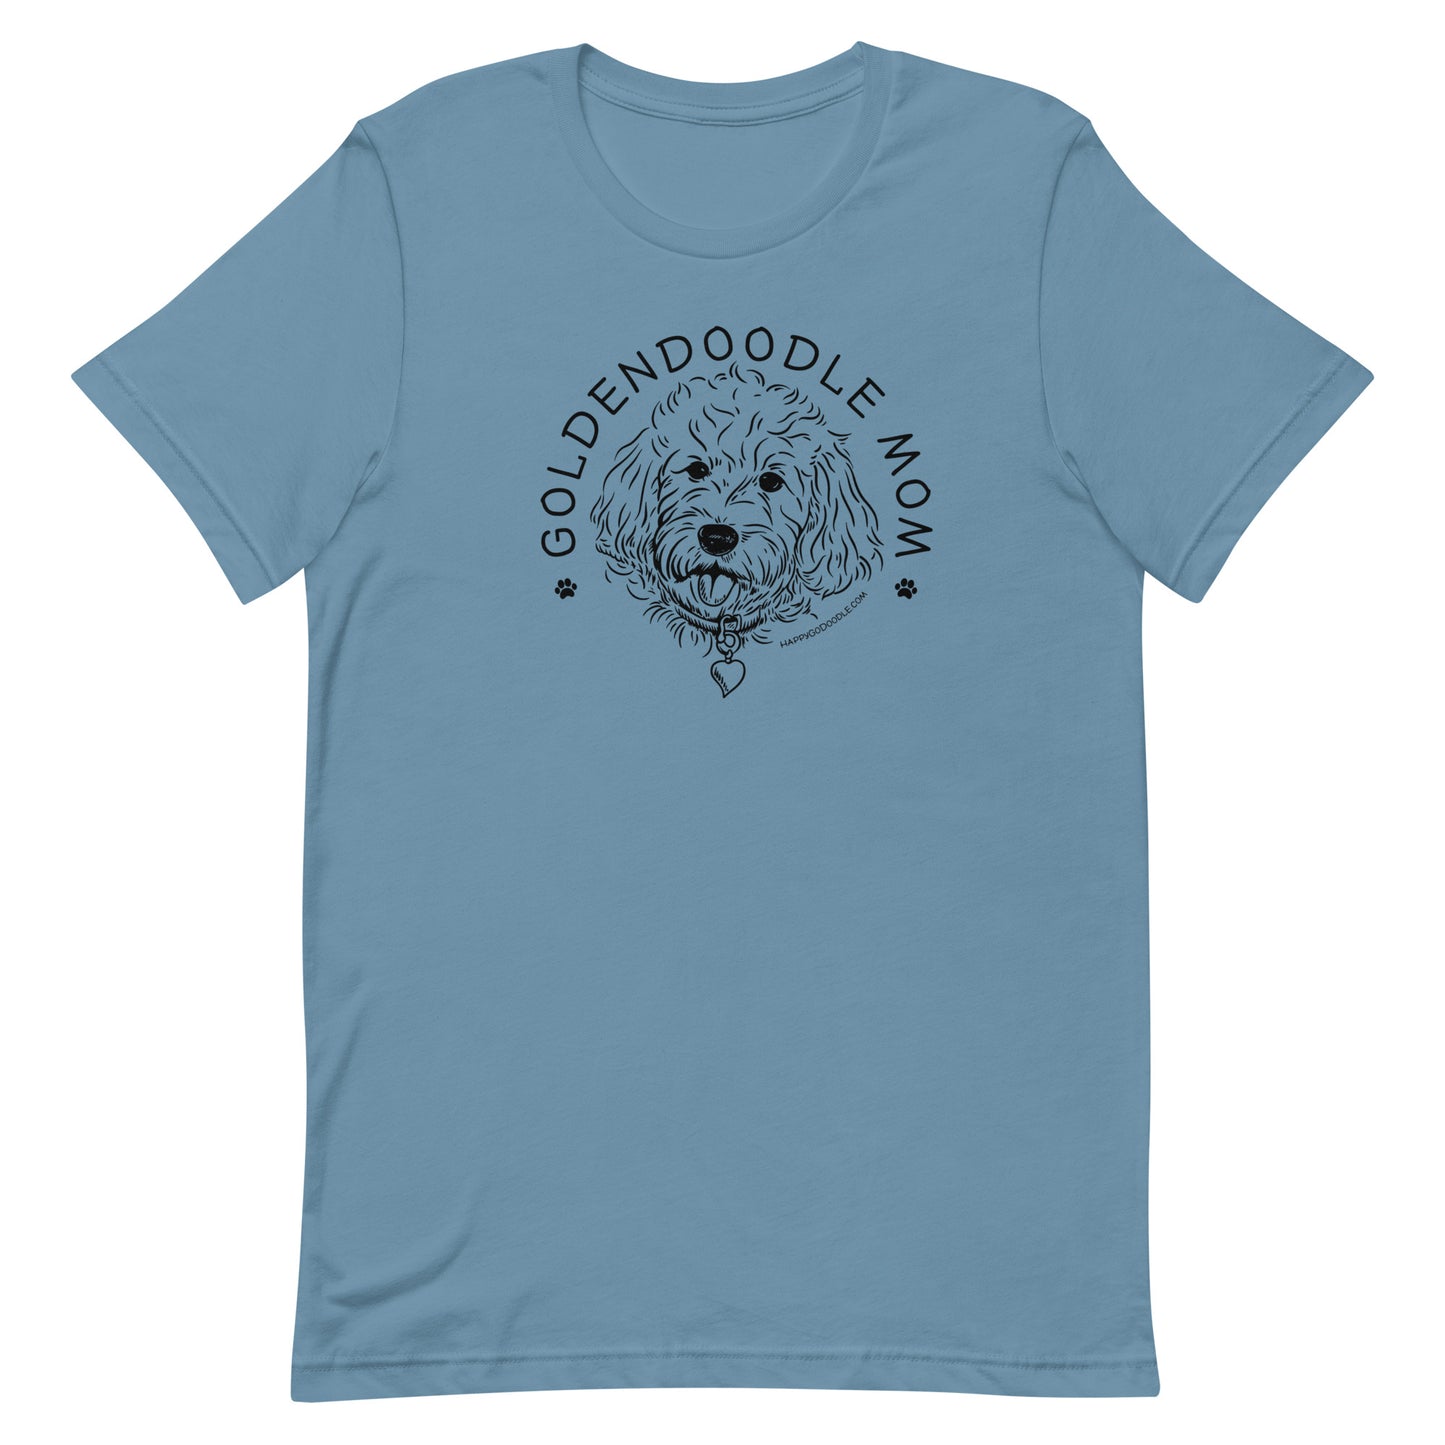 Goldendoodle Mom t-shirt with Goldendoodle face and words "Goldendoodle Mom" in steel blue olor